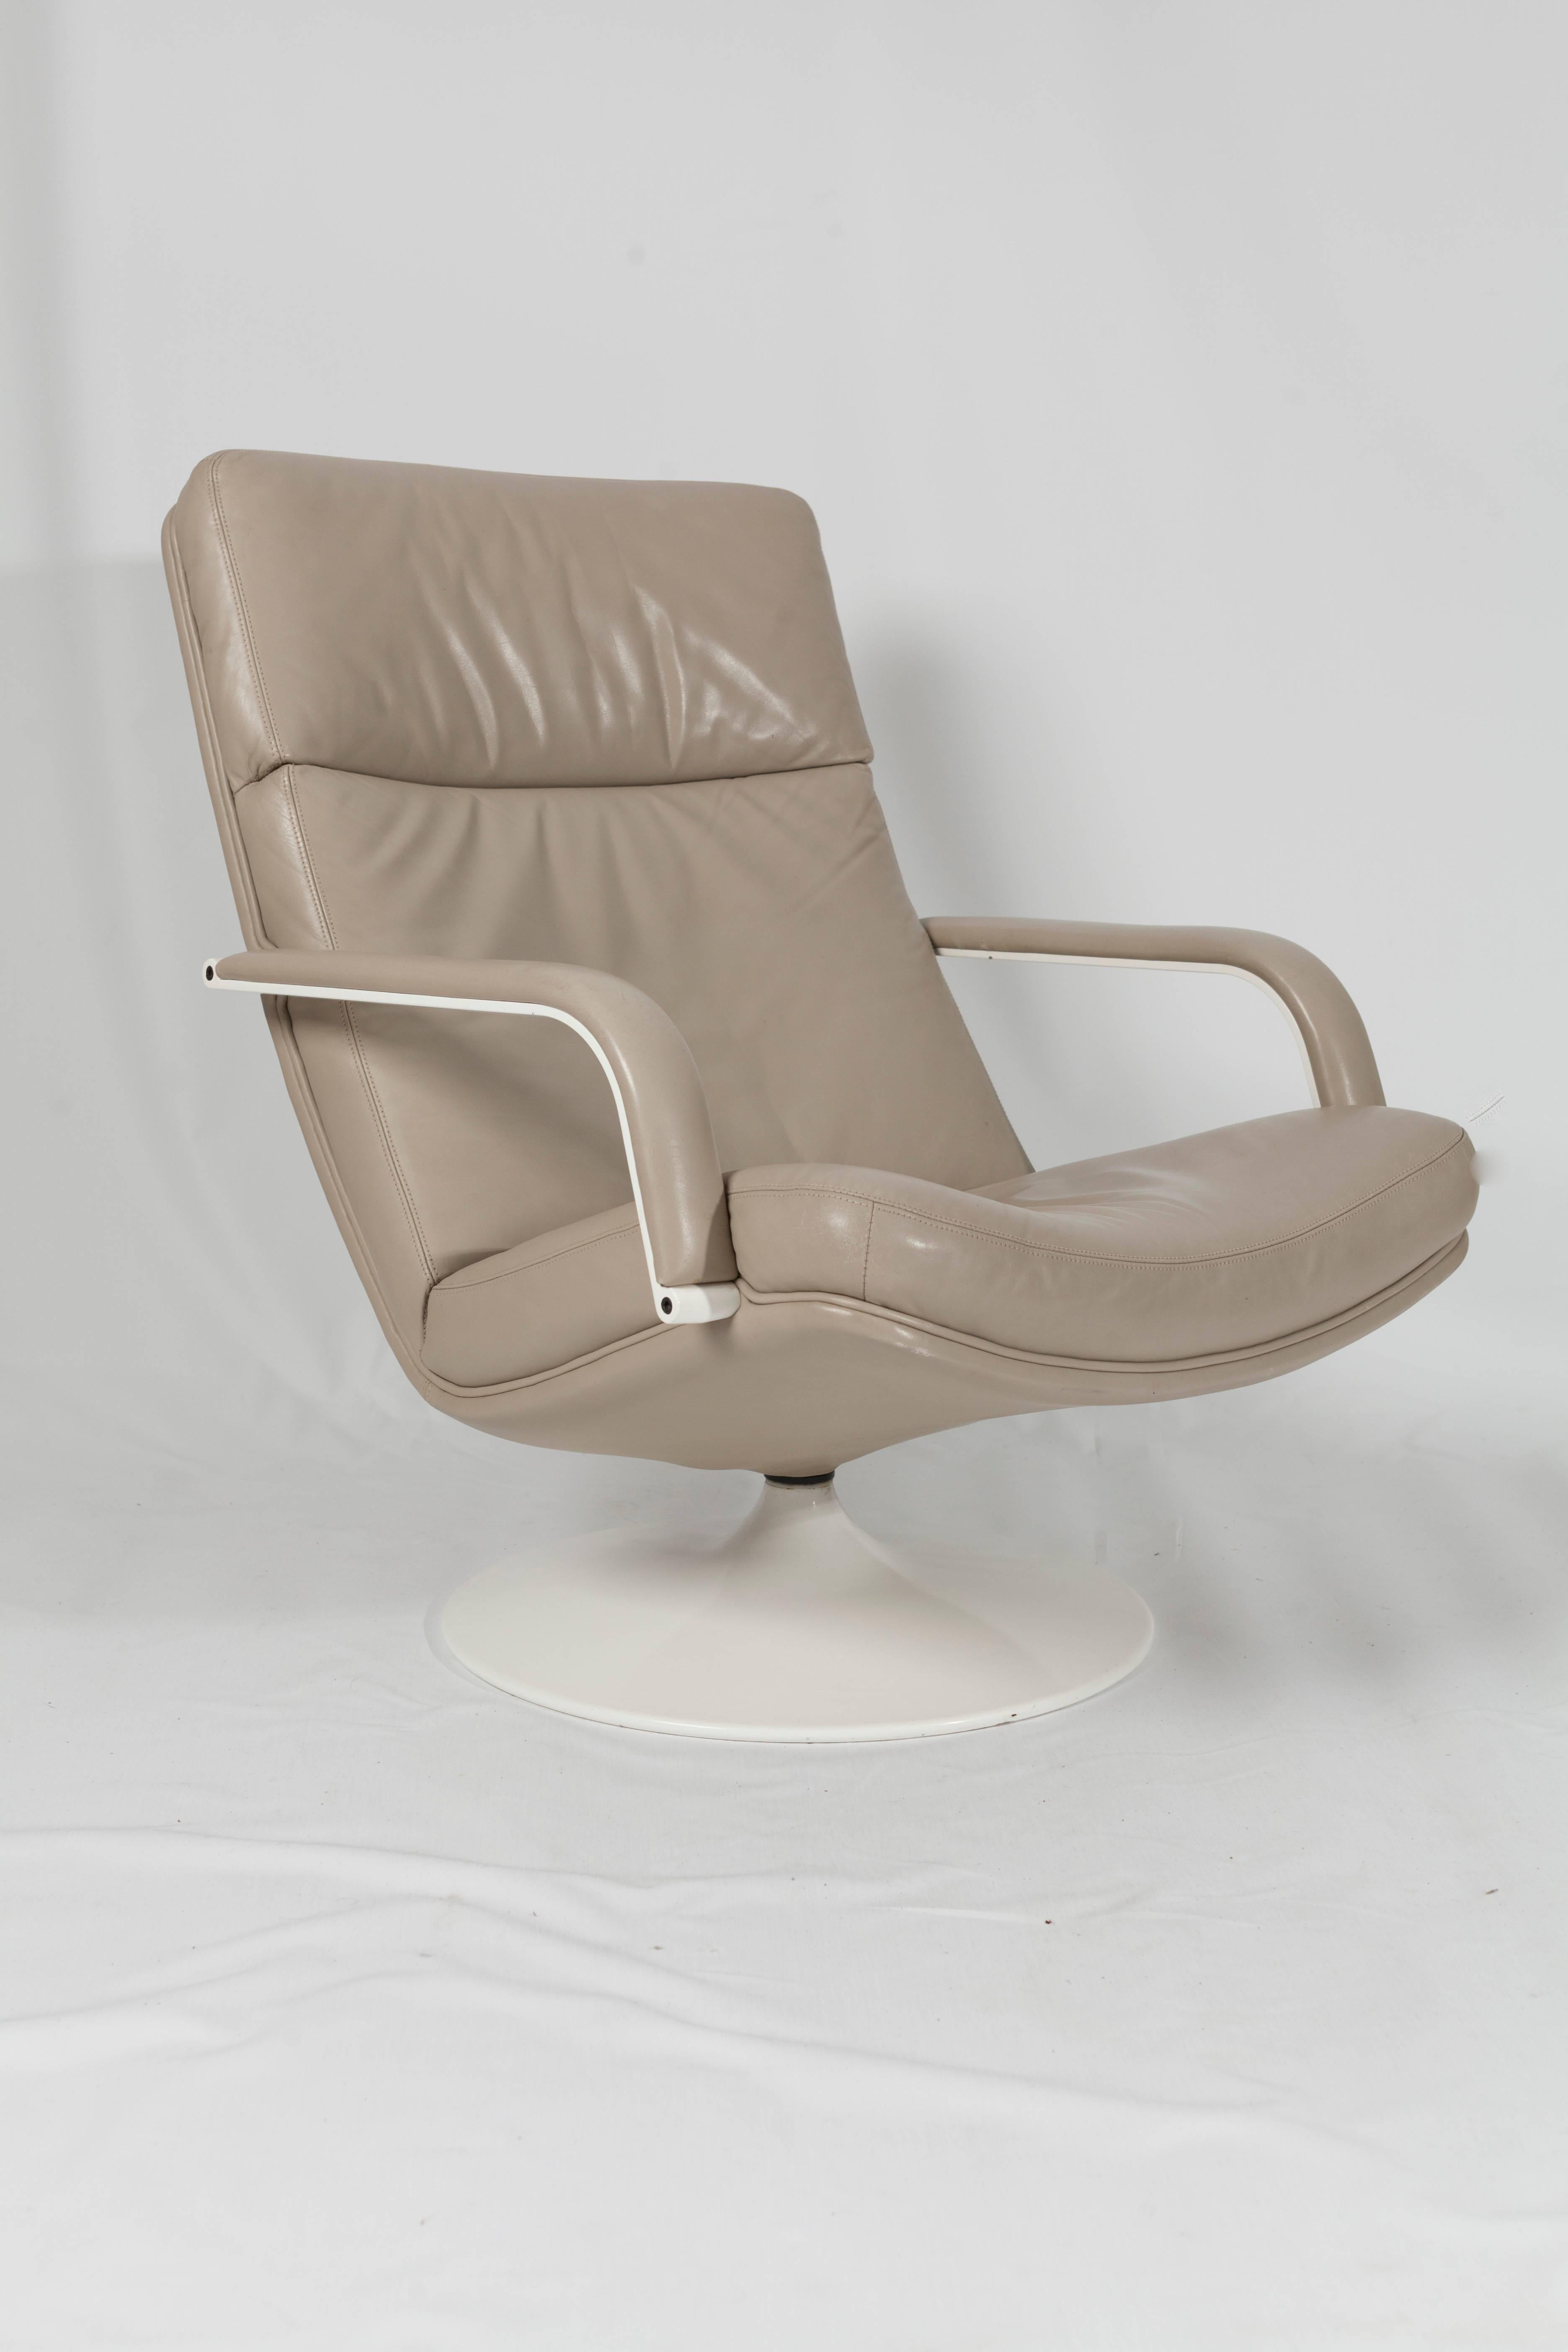 This set of F156 easy swivel chairs was designed in 1963 by Geoffrey Harcourt for Artifort.
With its steel base in white and beige/taupe leather this is a very chic ensemble.

